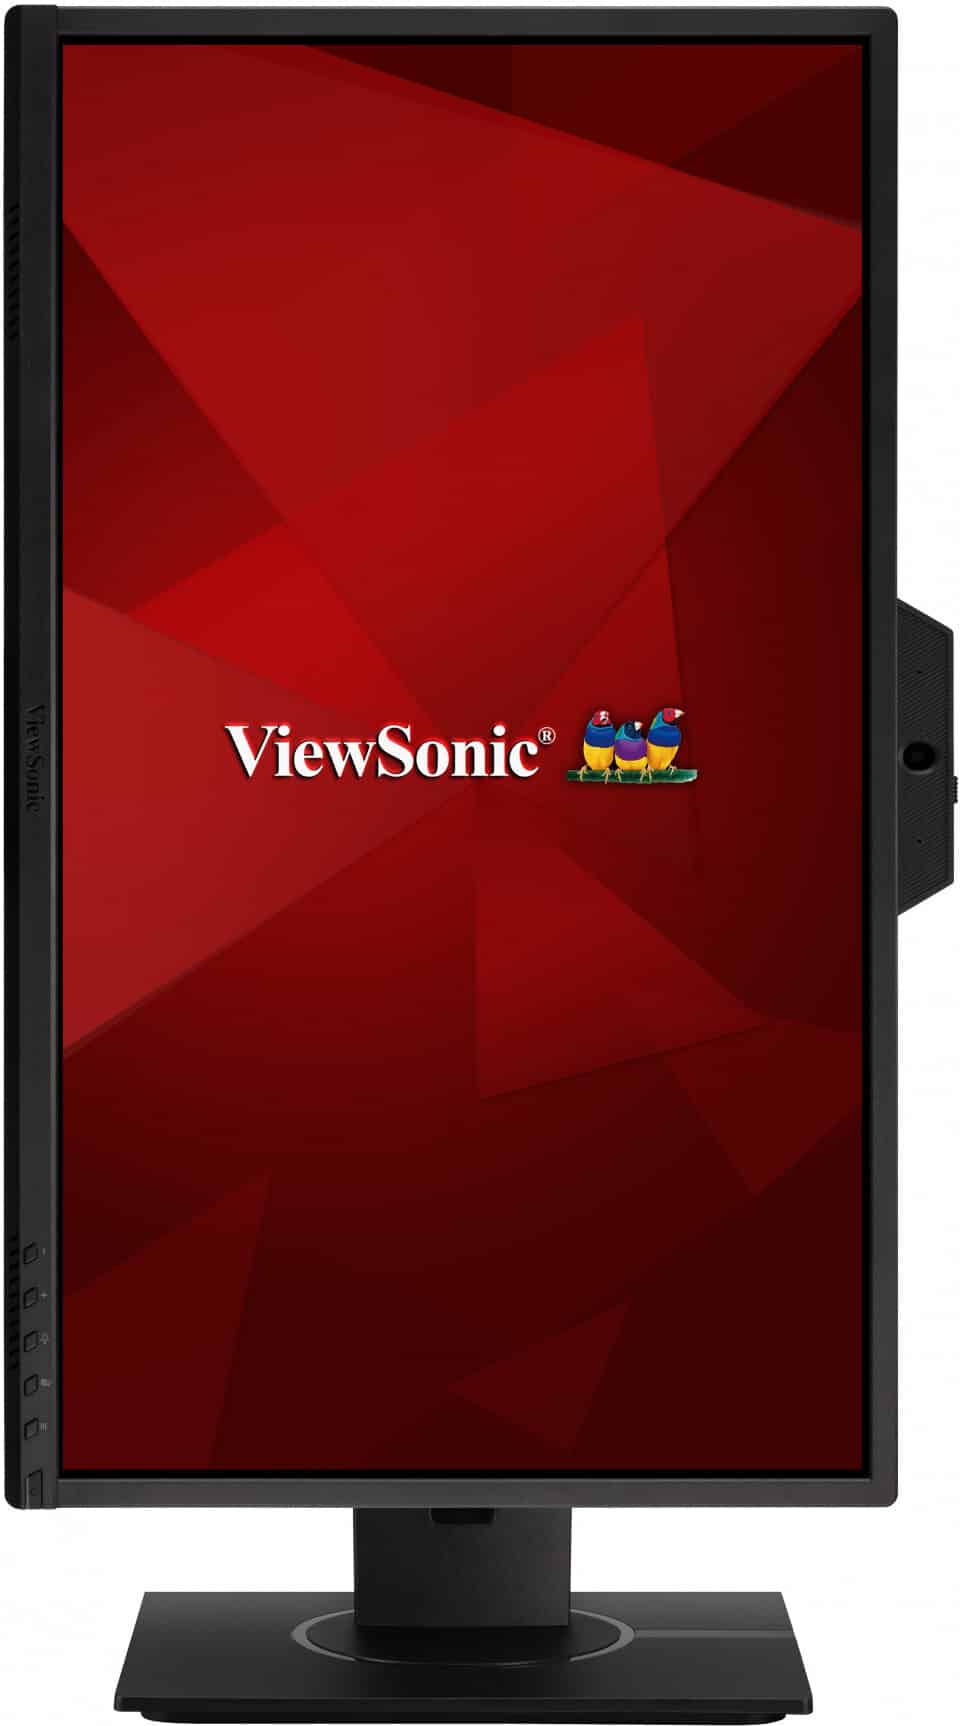 Viewsonic VG2440V Front Vertical View